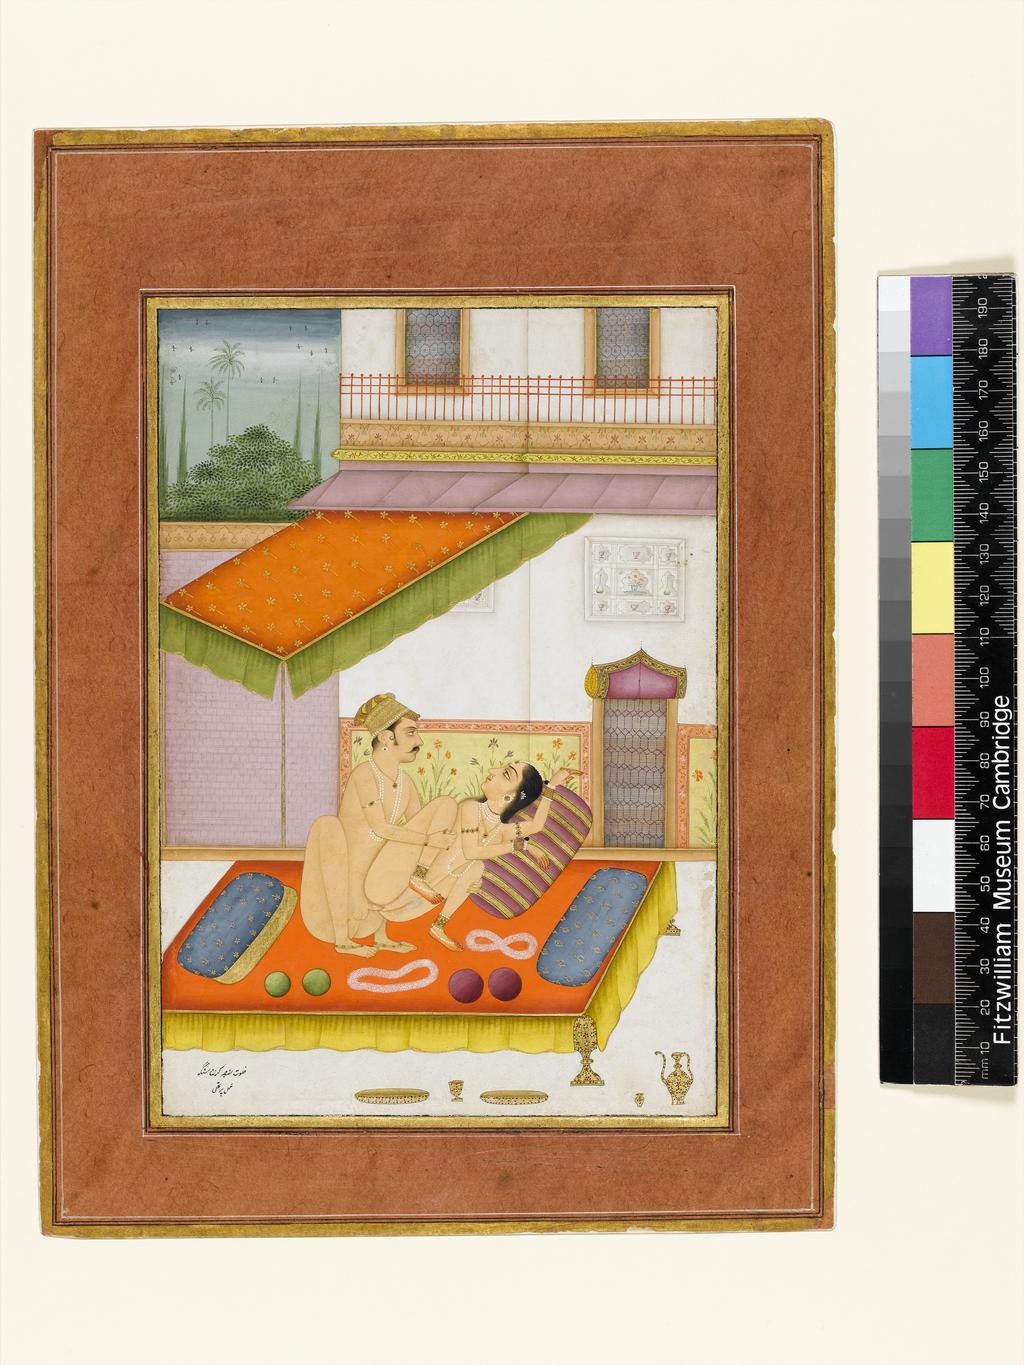 An image of The private pleasure of the Raja Karan, by Pirthi. Bodycolour including white, pen and ink with gold on paper, height 197mm, width 136mm, circa 1678.